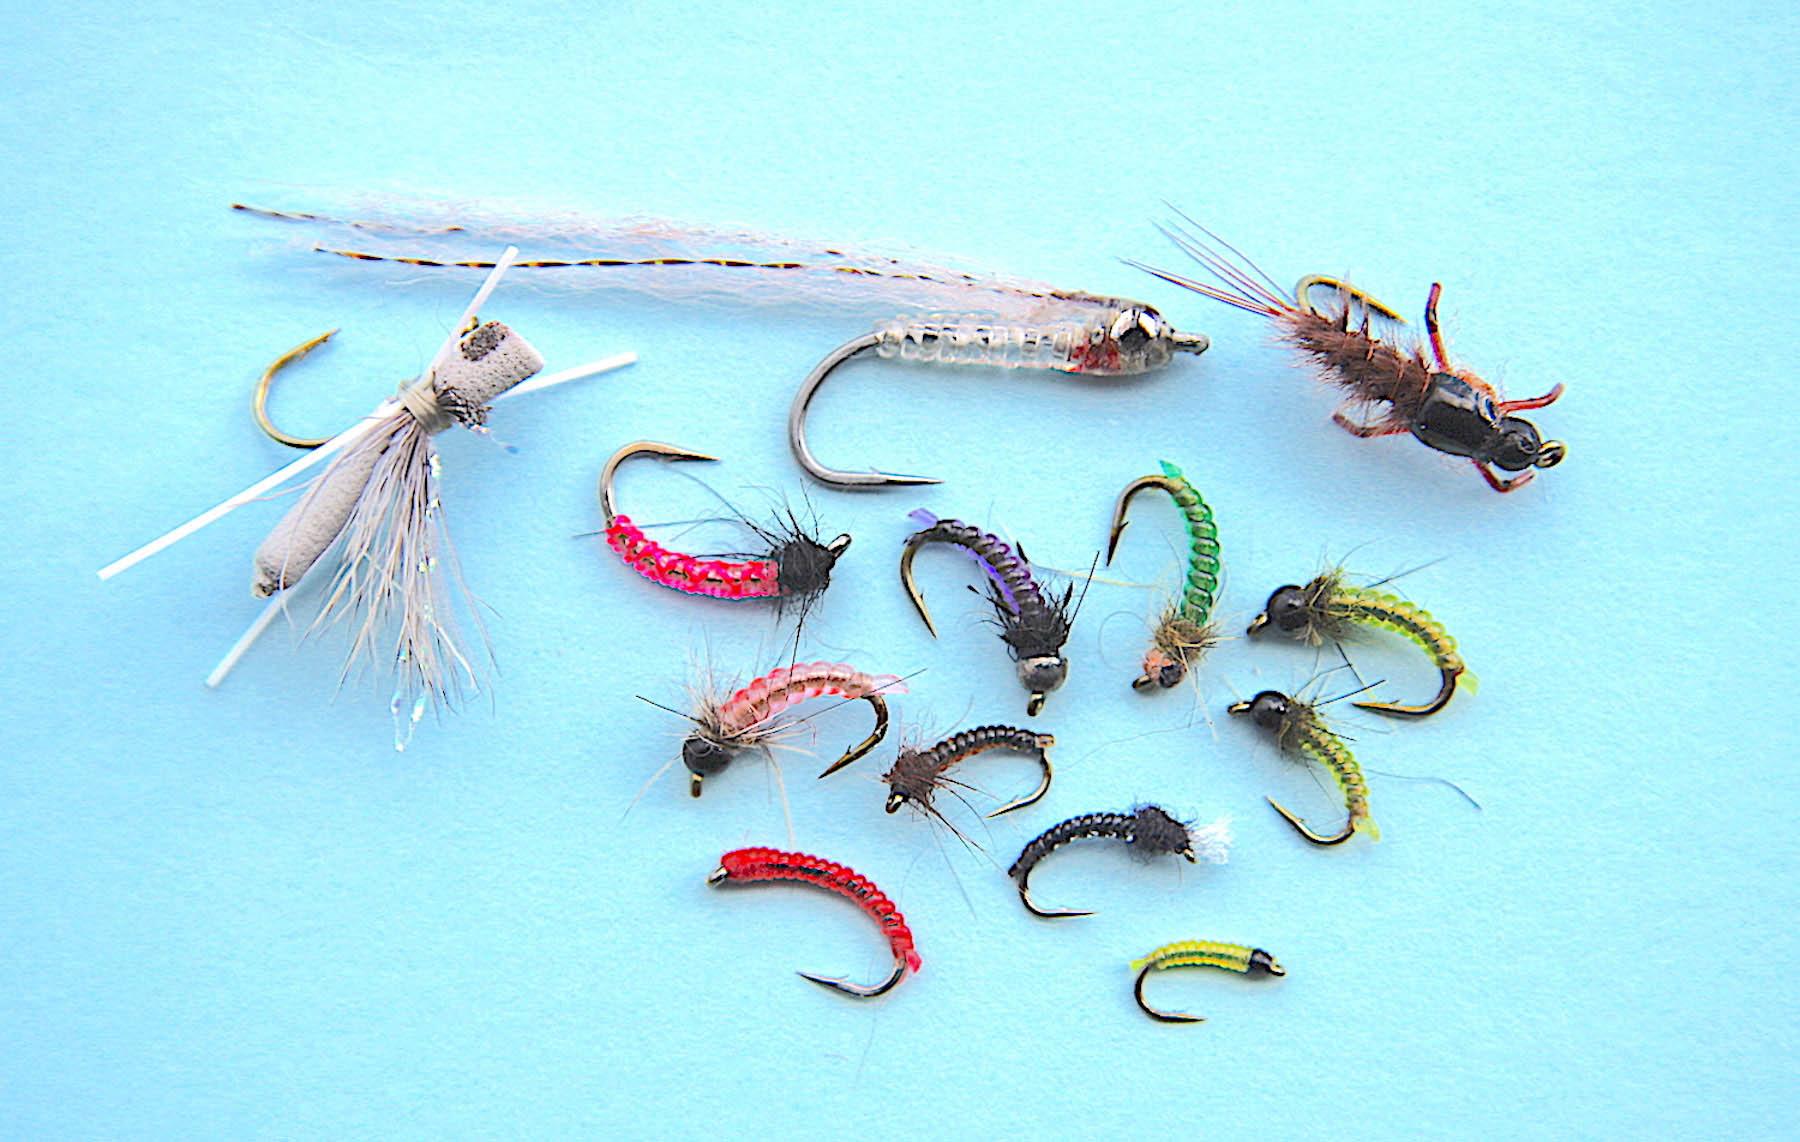 A collection of many different innovative fly tying patterns designed by Marc Griffiths, and tied with stretch cord